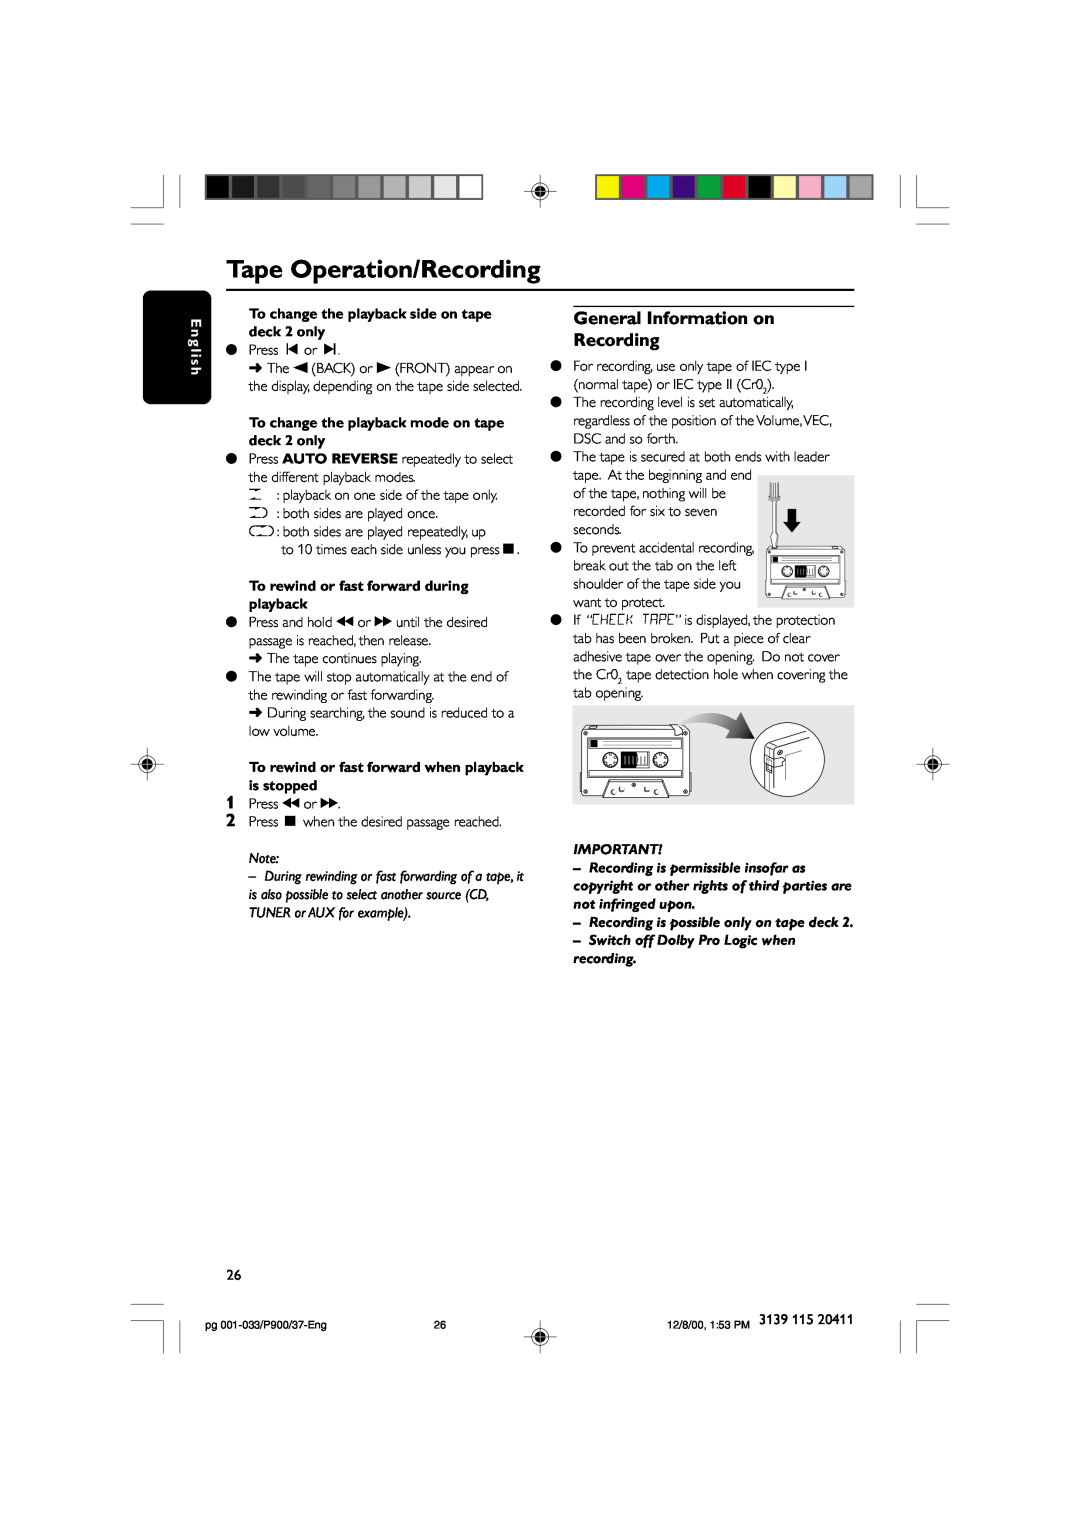 Philips FW-P900 manual General Information on Recording, Tape Operation/Recording, To change the playback side on tape 